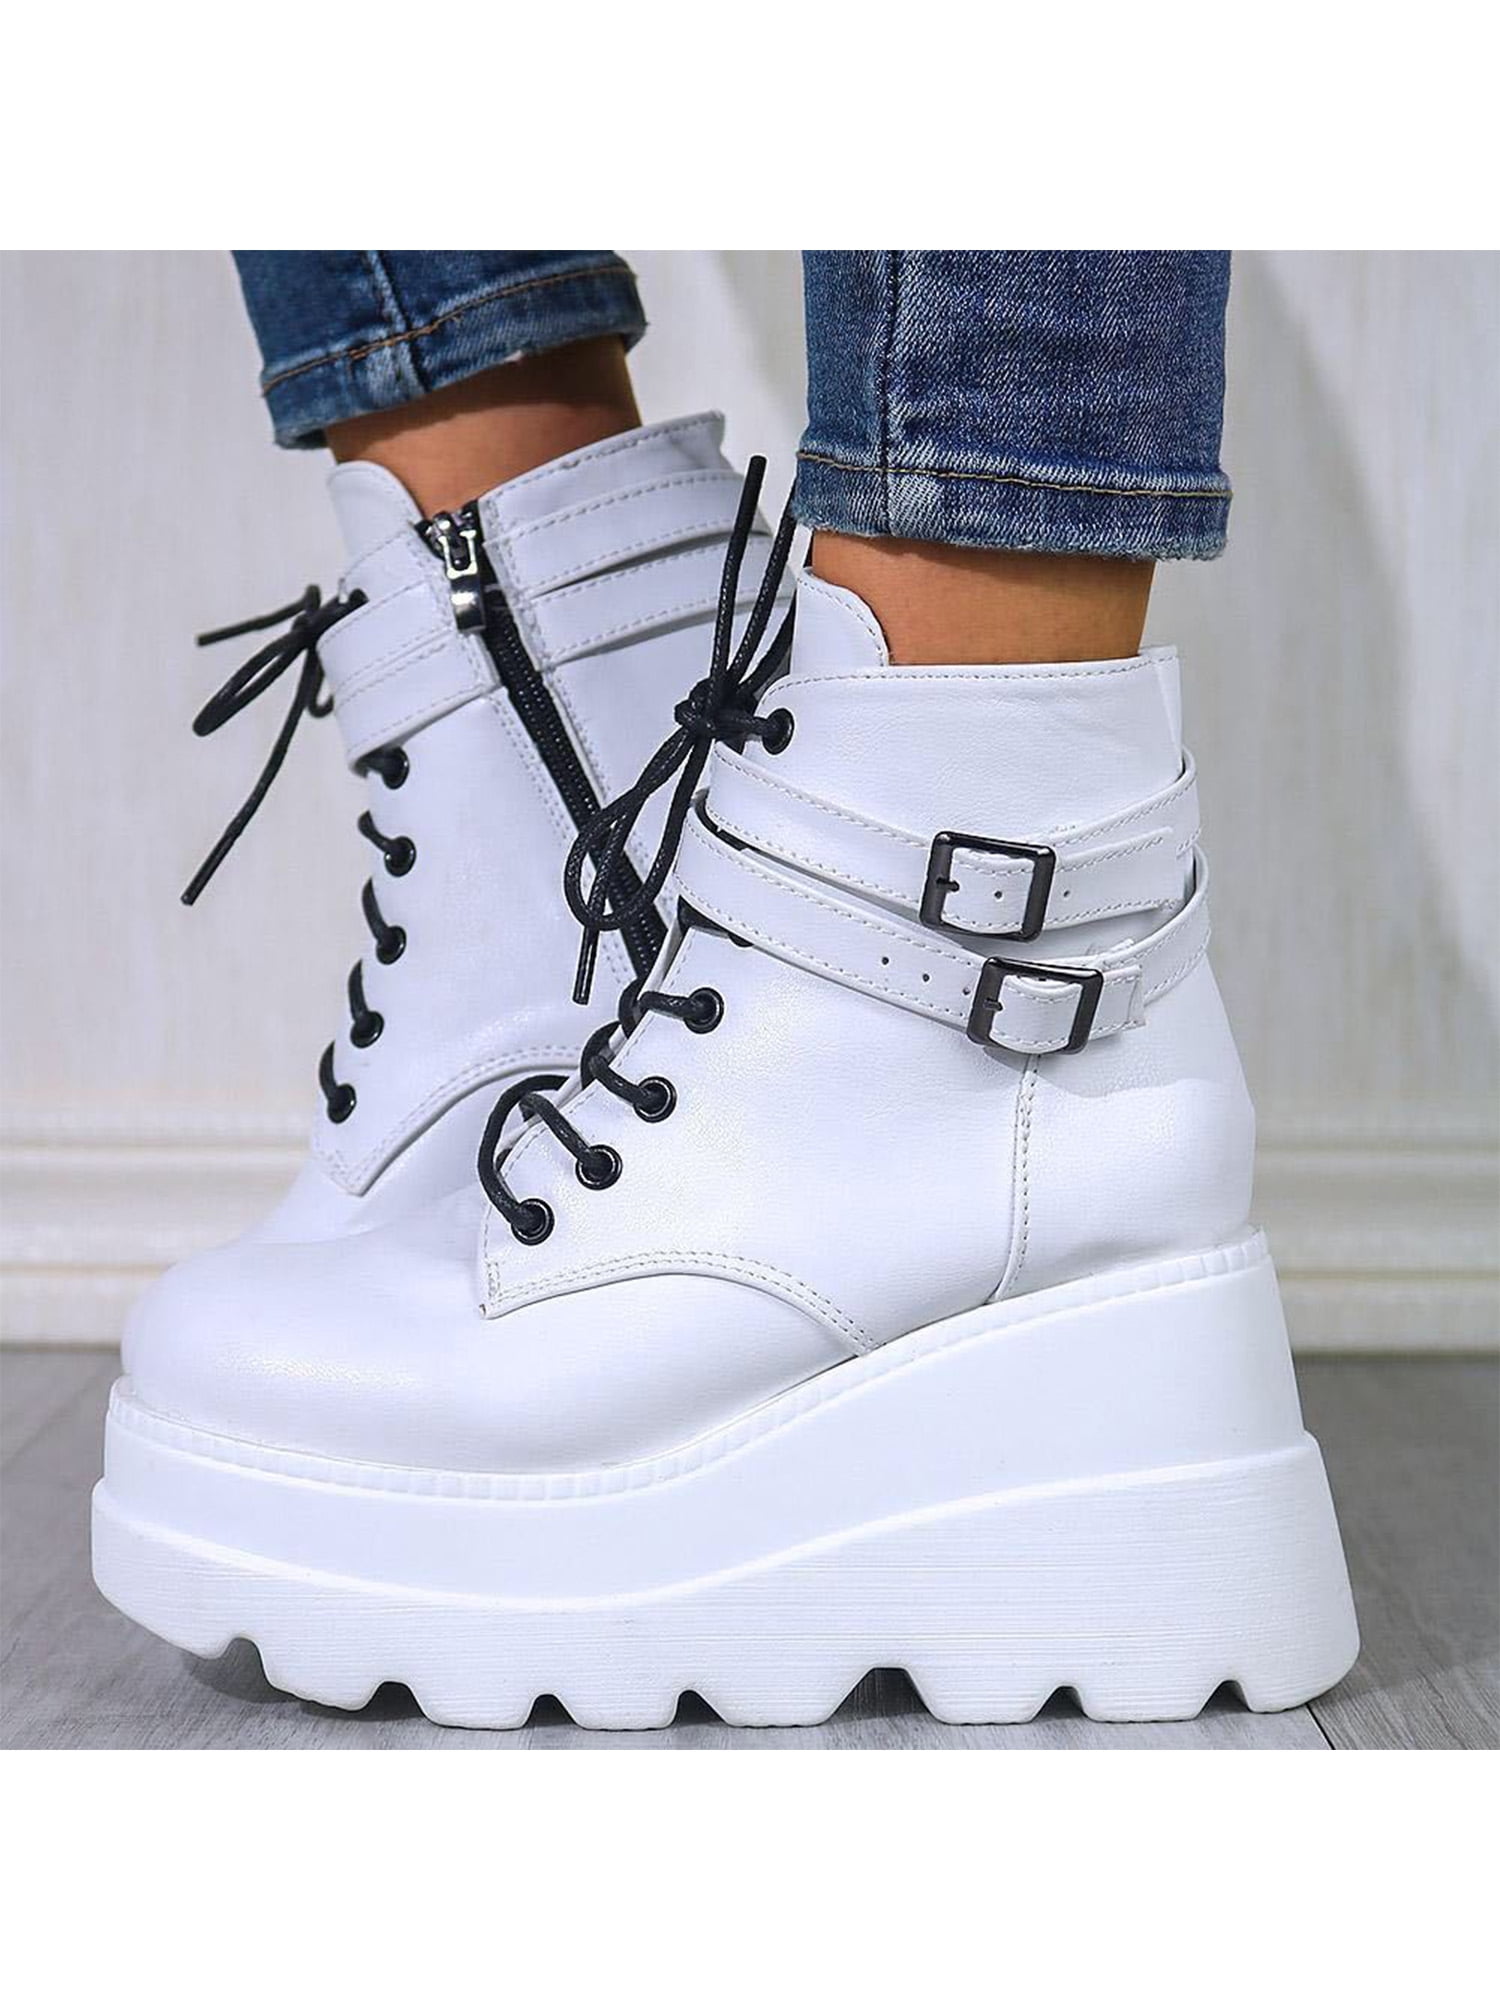 Women Ladies Mid Calf Boots Retro Classic Boots Lace Up Shoes US Size 4-12